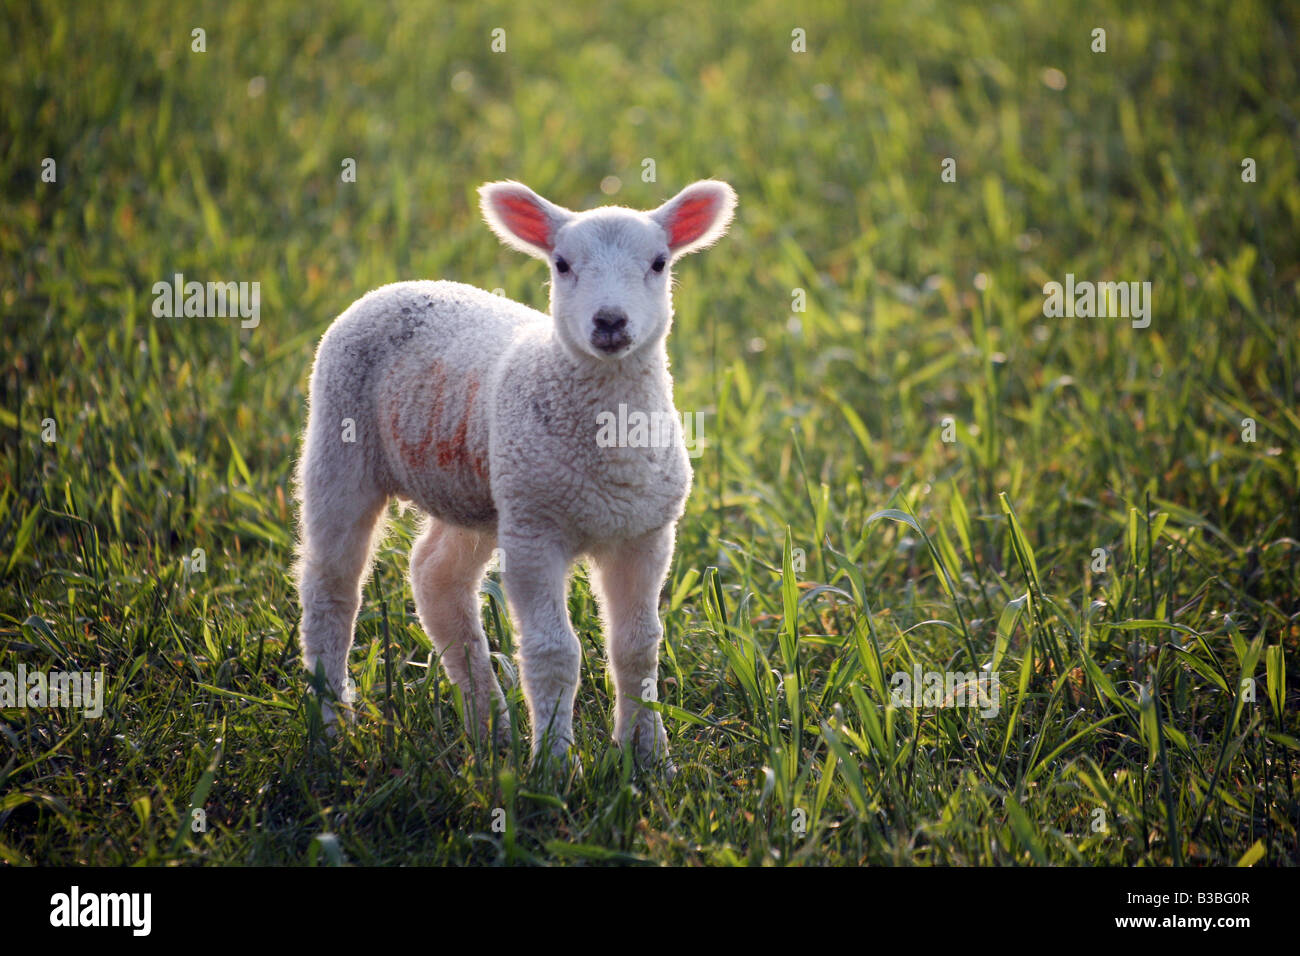 Spring_Lamb_standing_in_field_looking_at